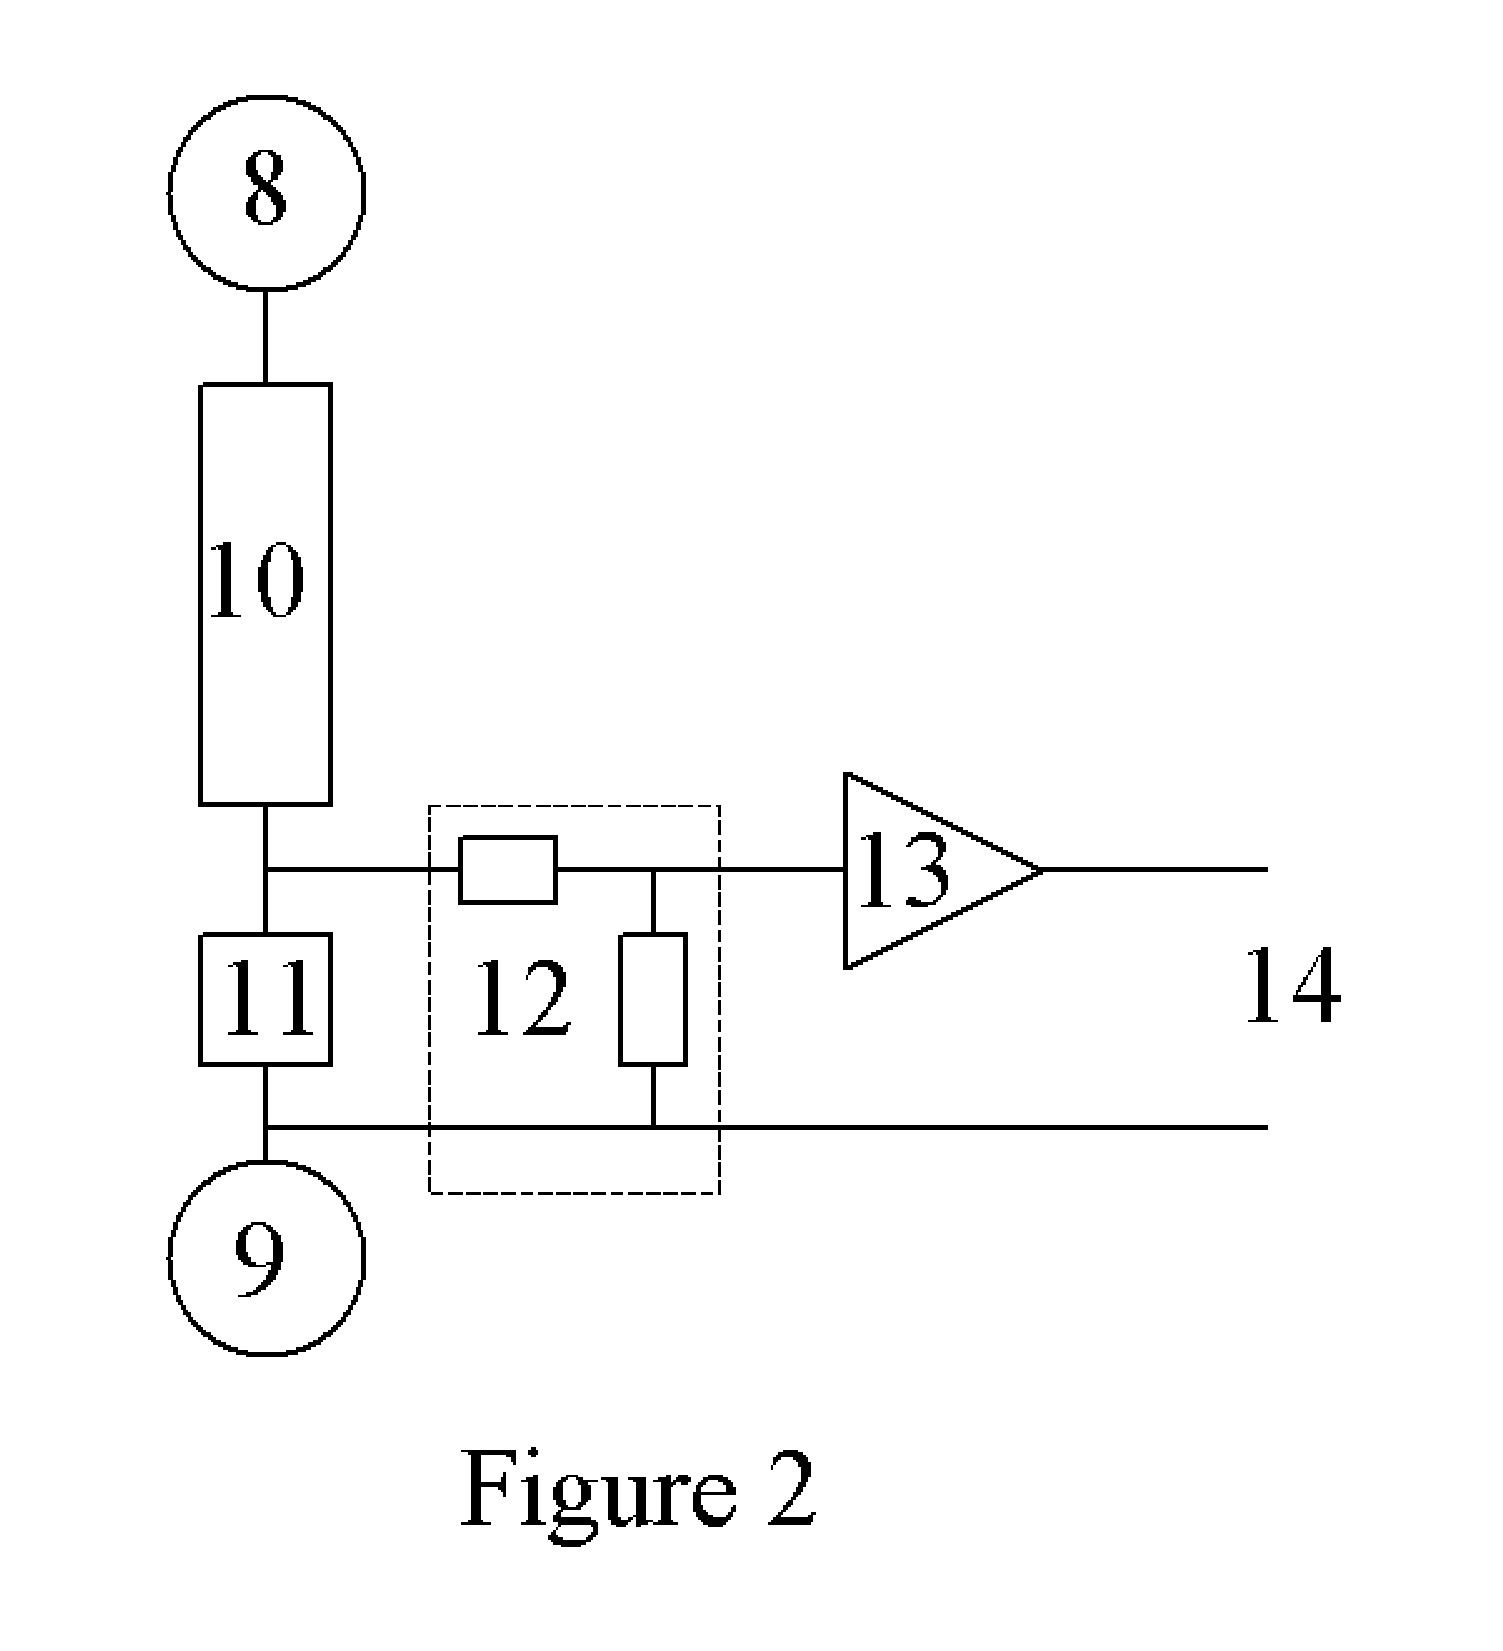 Voltage sensor and dielectric material